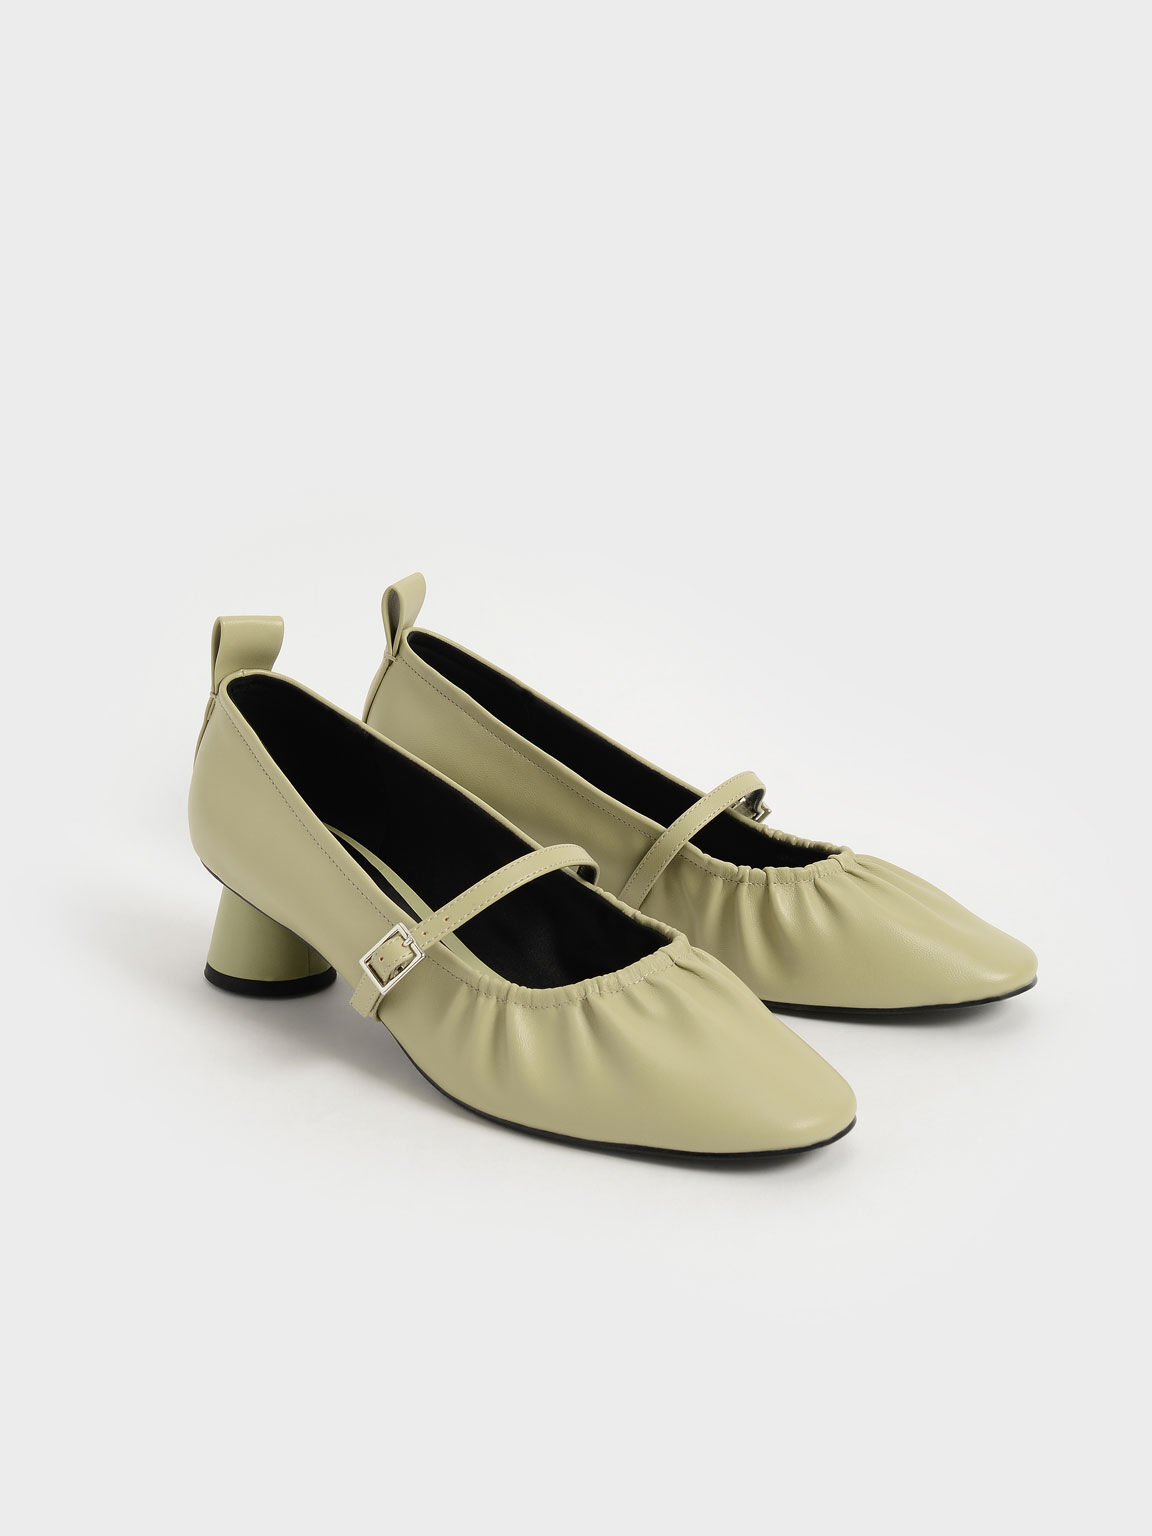 Ruched Mary Jane Pumps, Sage Green, hi-res